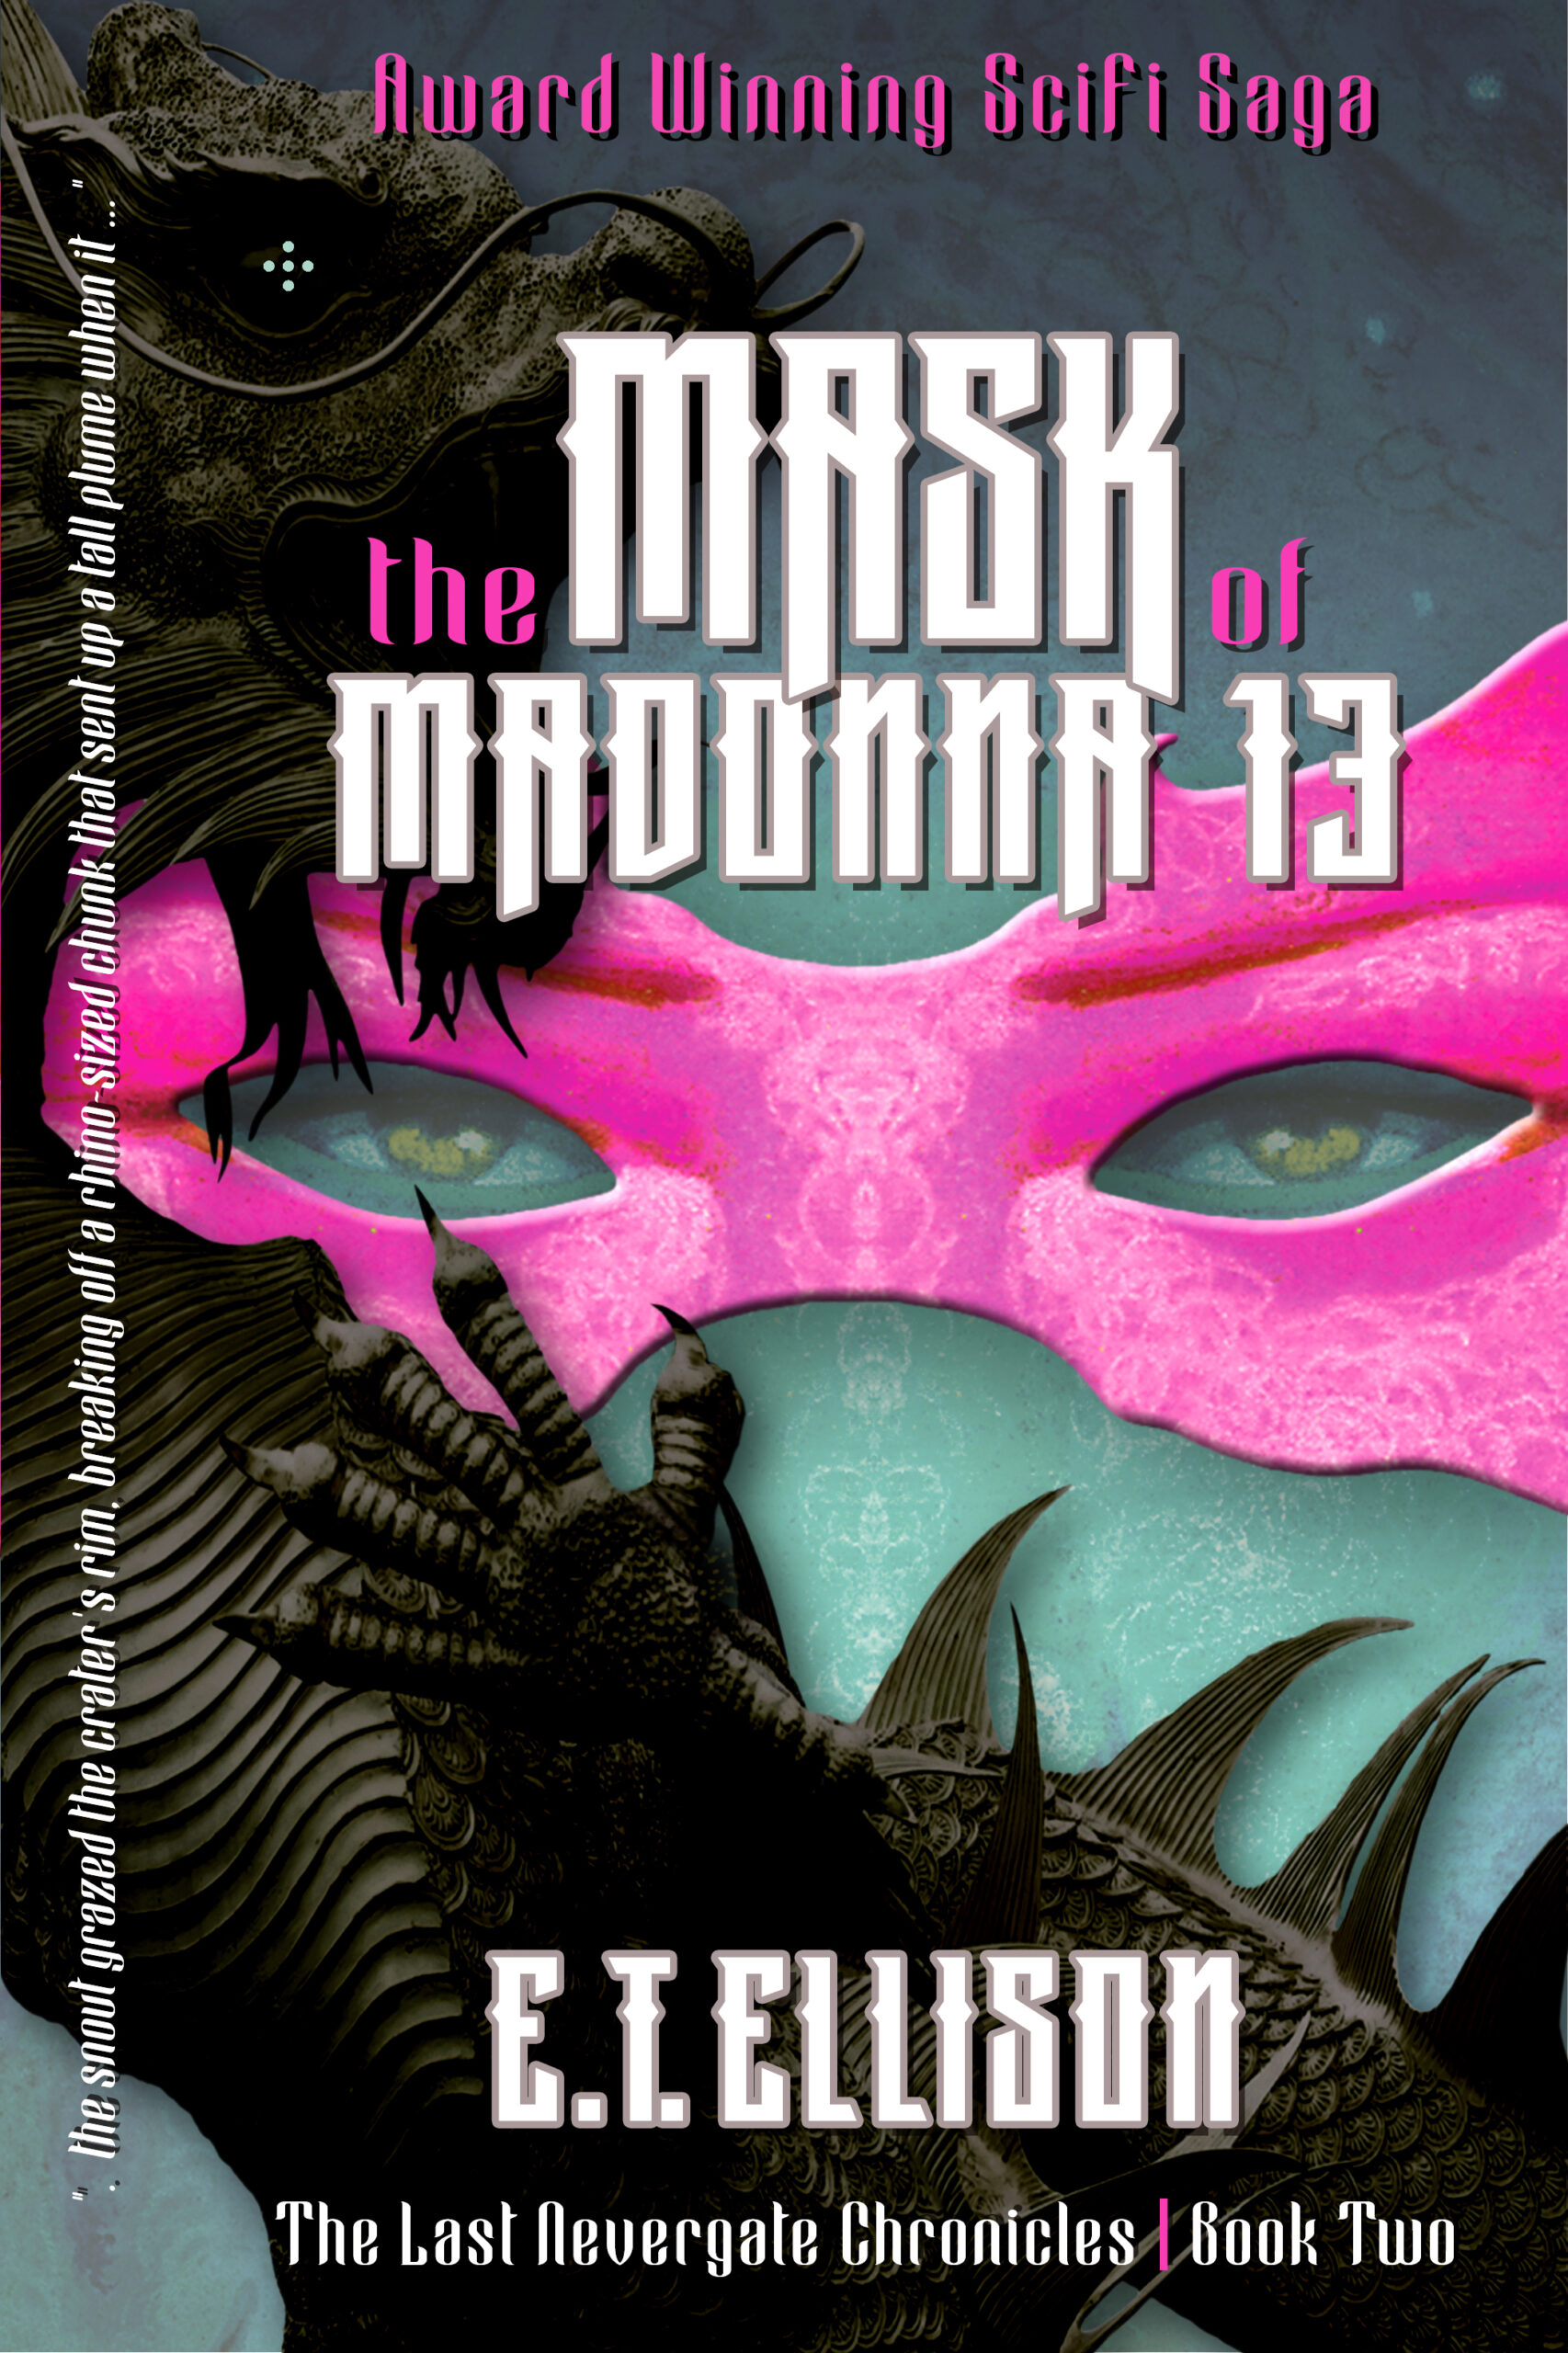 The Mask of Madonna 13